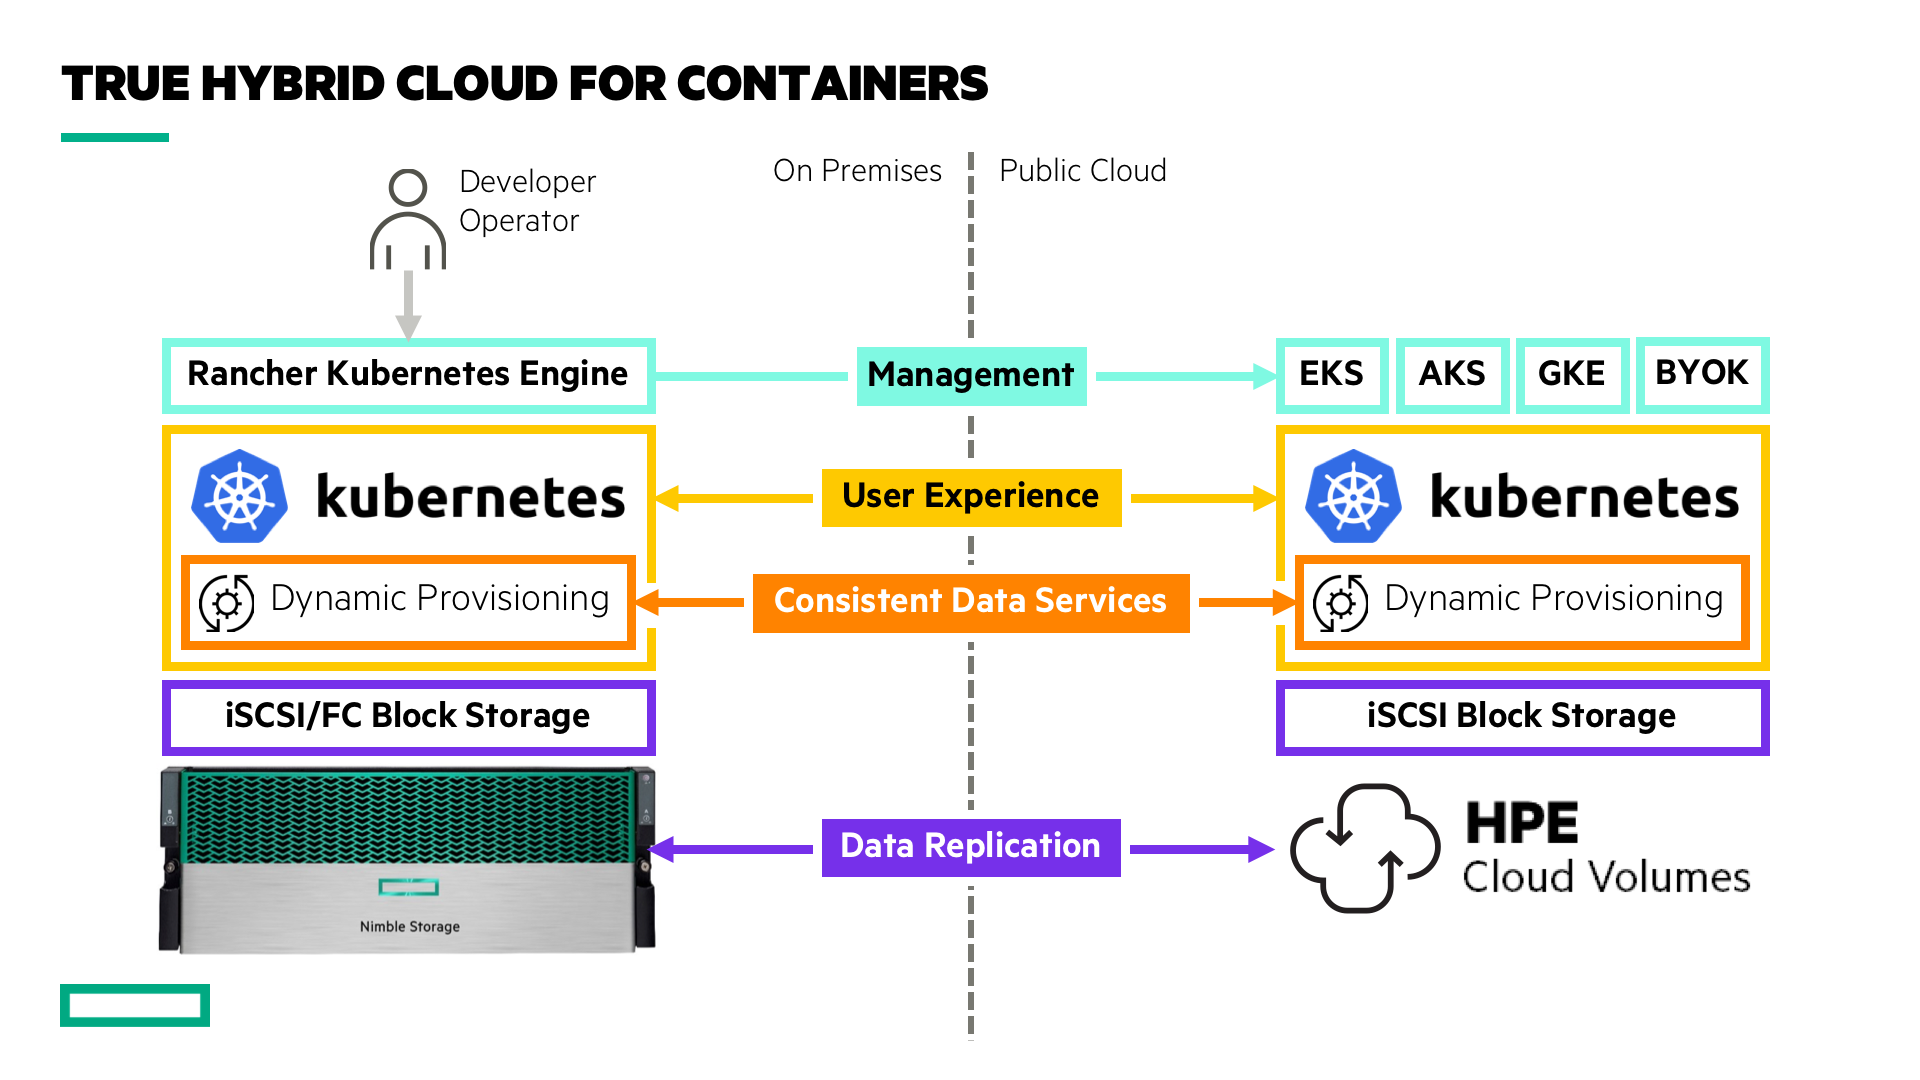 True Hybrid Cloud for Containers